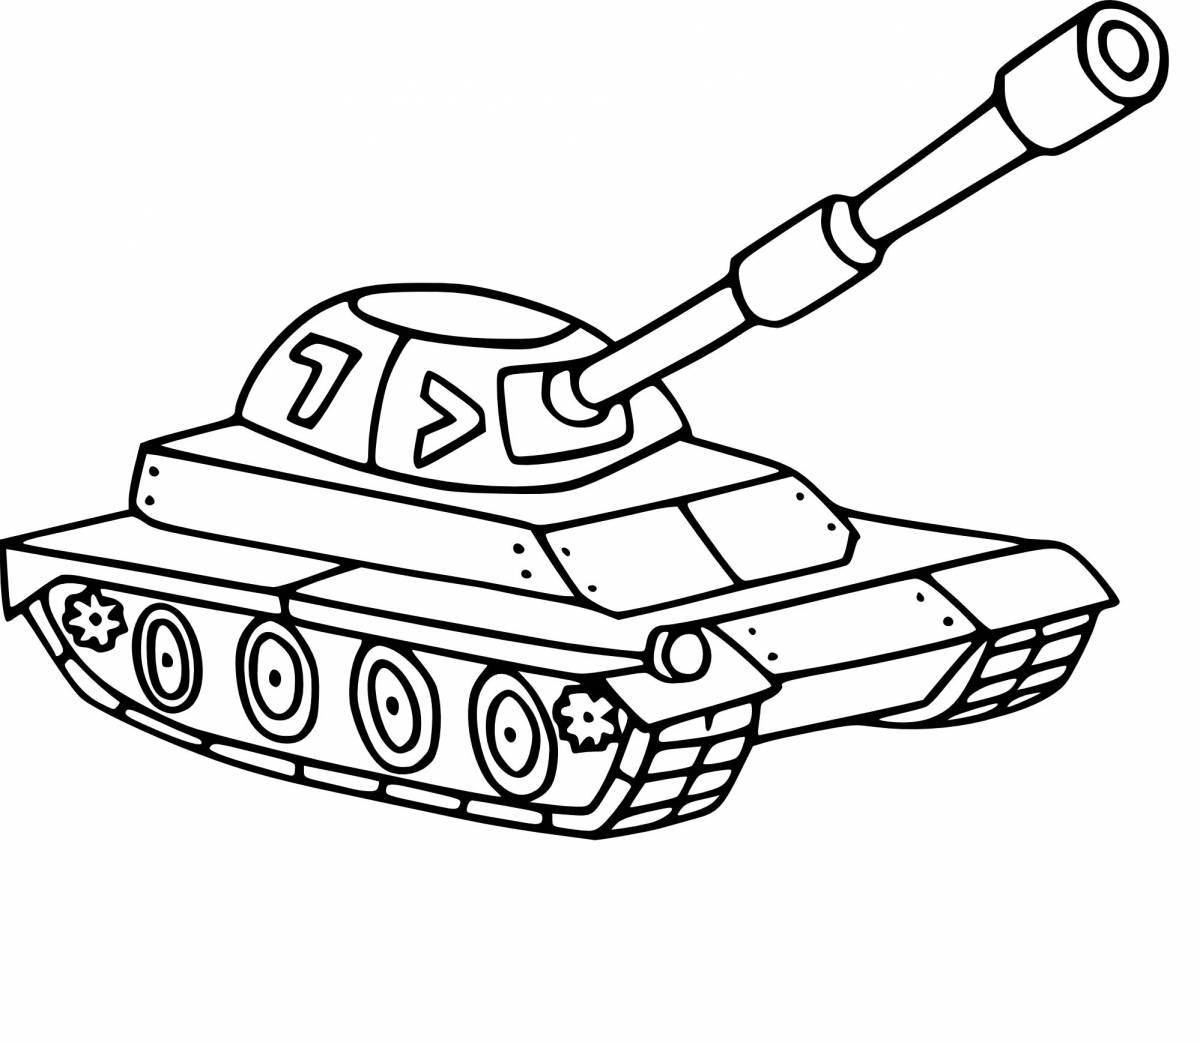 Colourful military vehicle coloring pages for kids